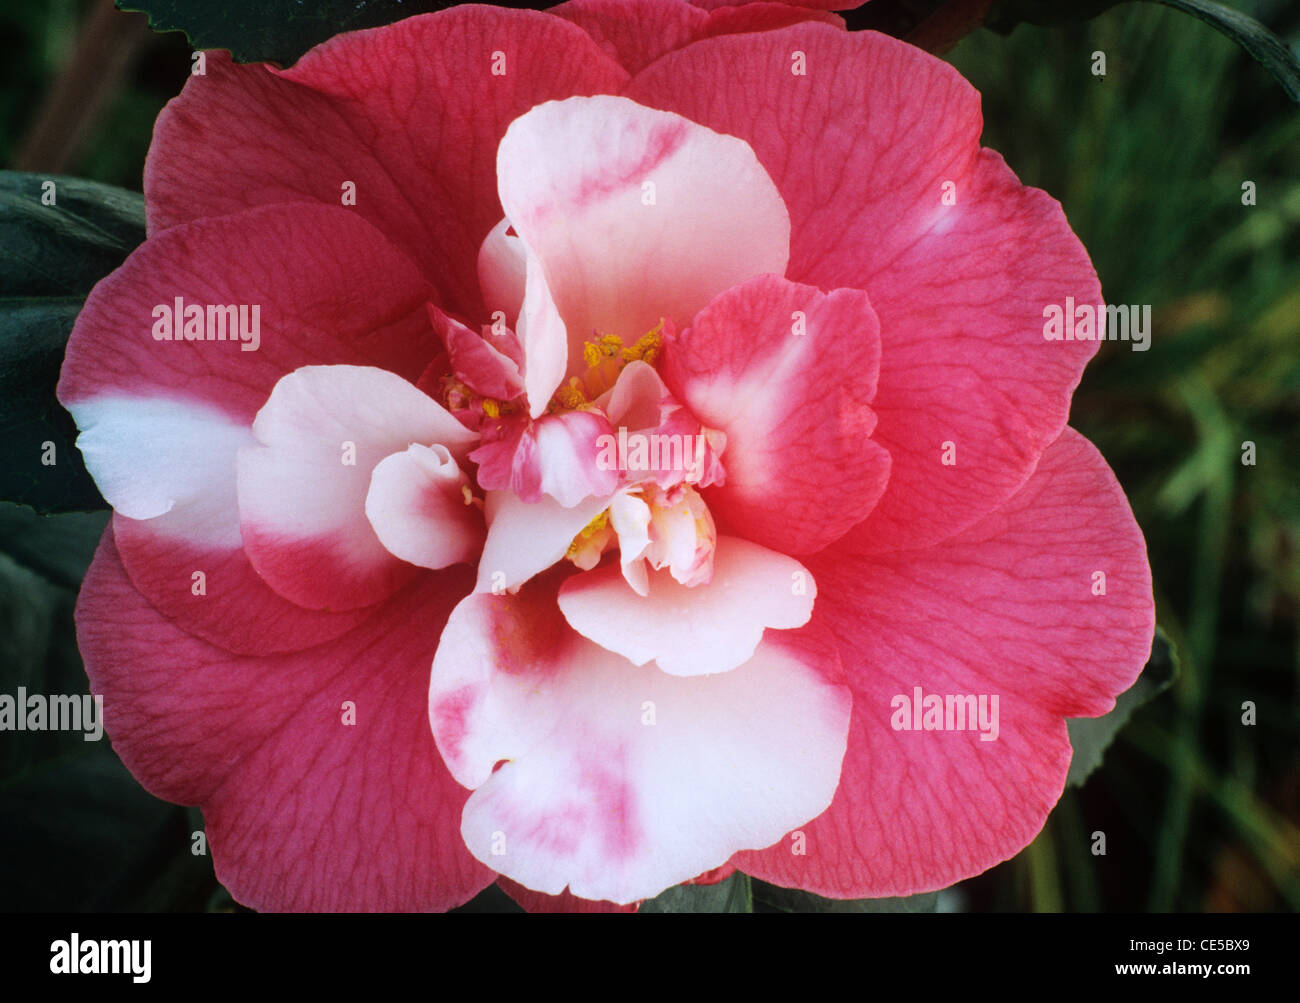 Camellia japonica 'Nagasaki' red and white flower flowers garden plant plants camellias Stock Photo